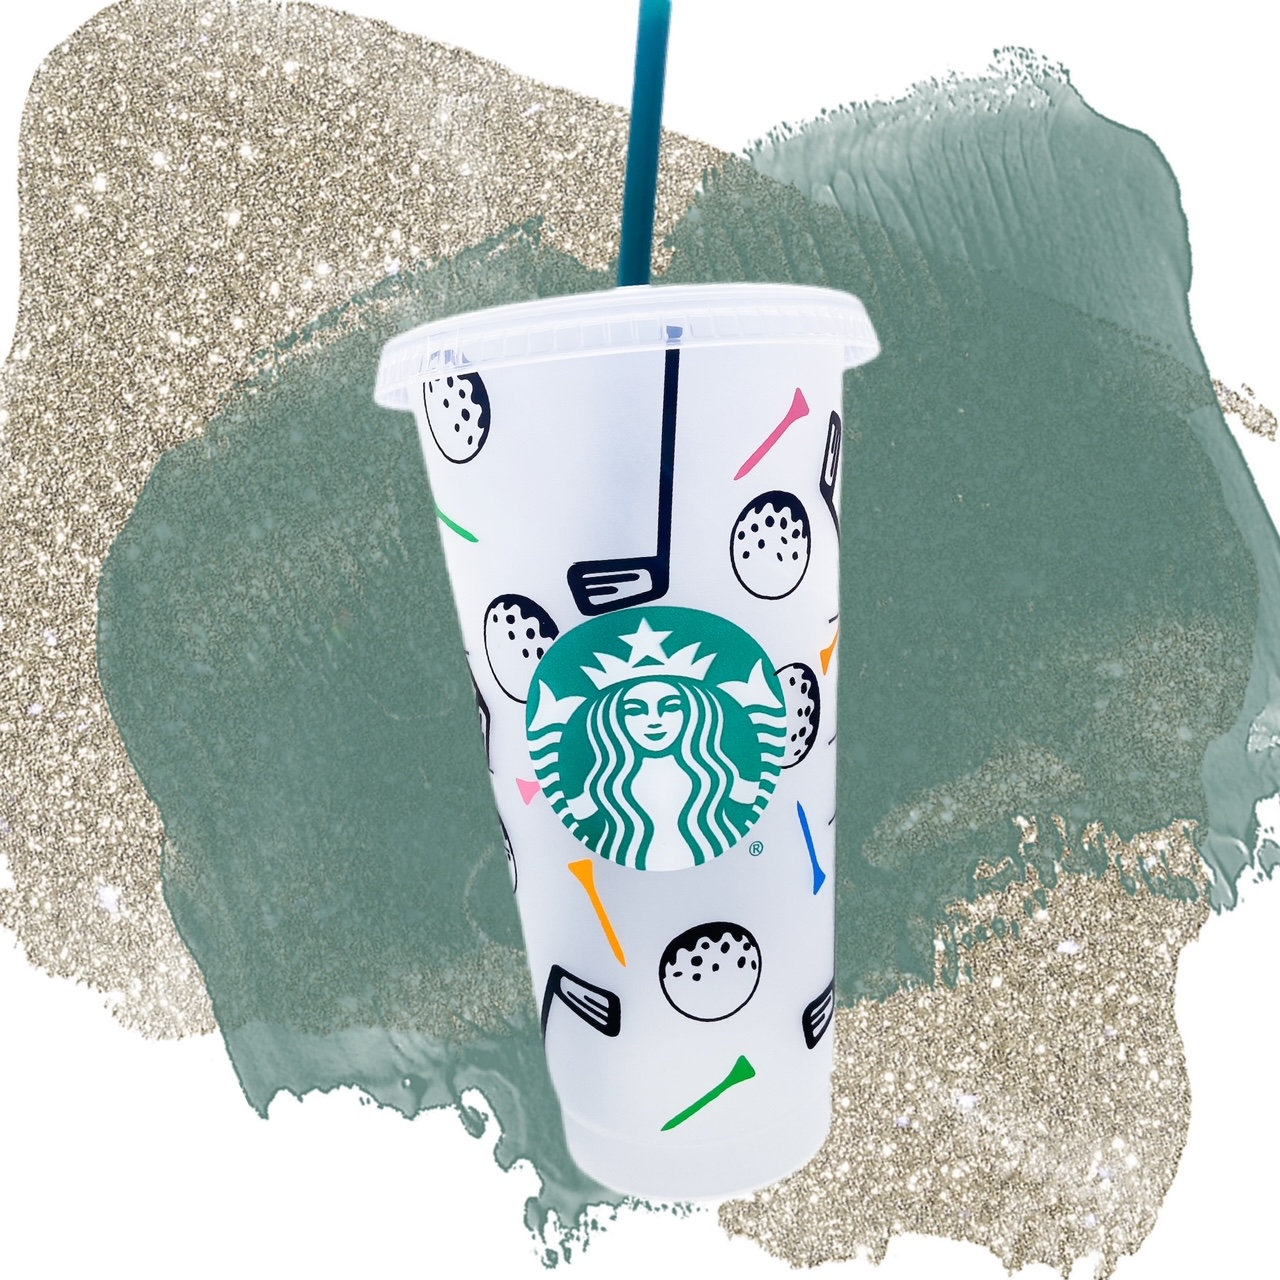 Personalized Starbucks Cup/ Personalized Christmas gift/Stocking Stuff –  Simply Perfect Designs